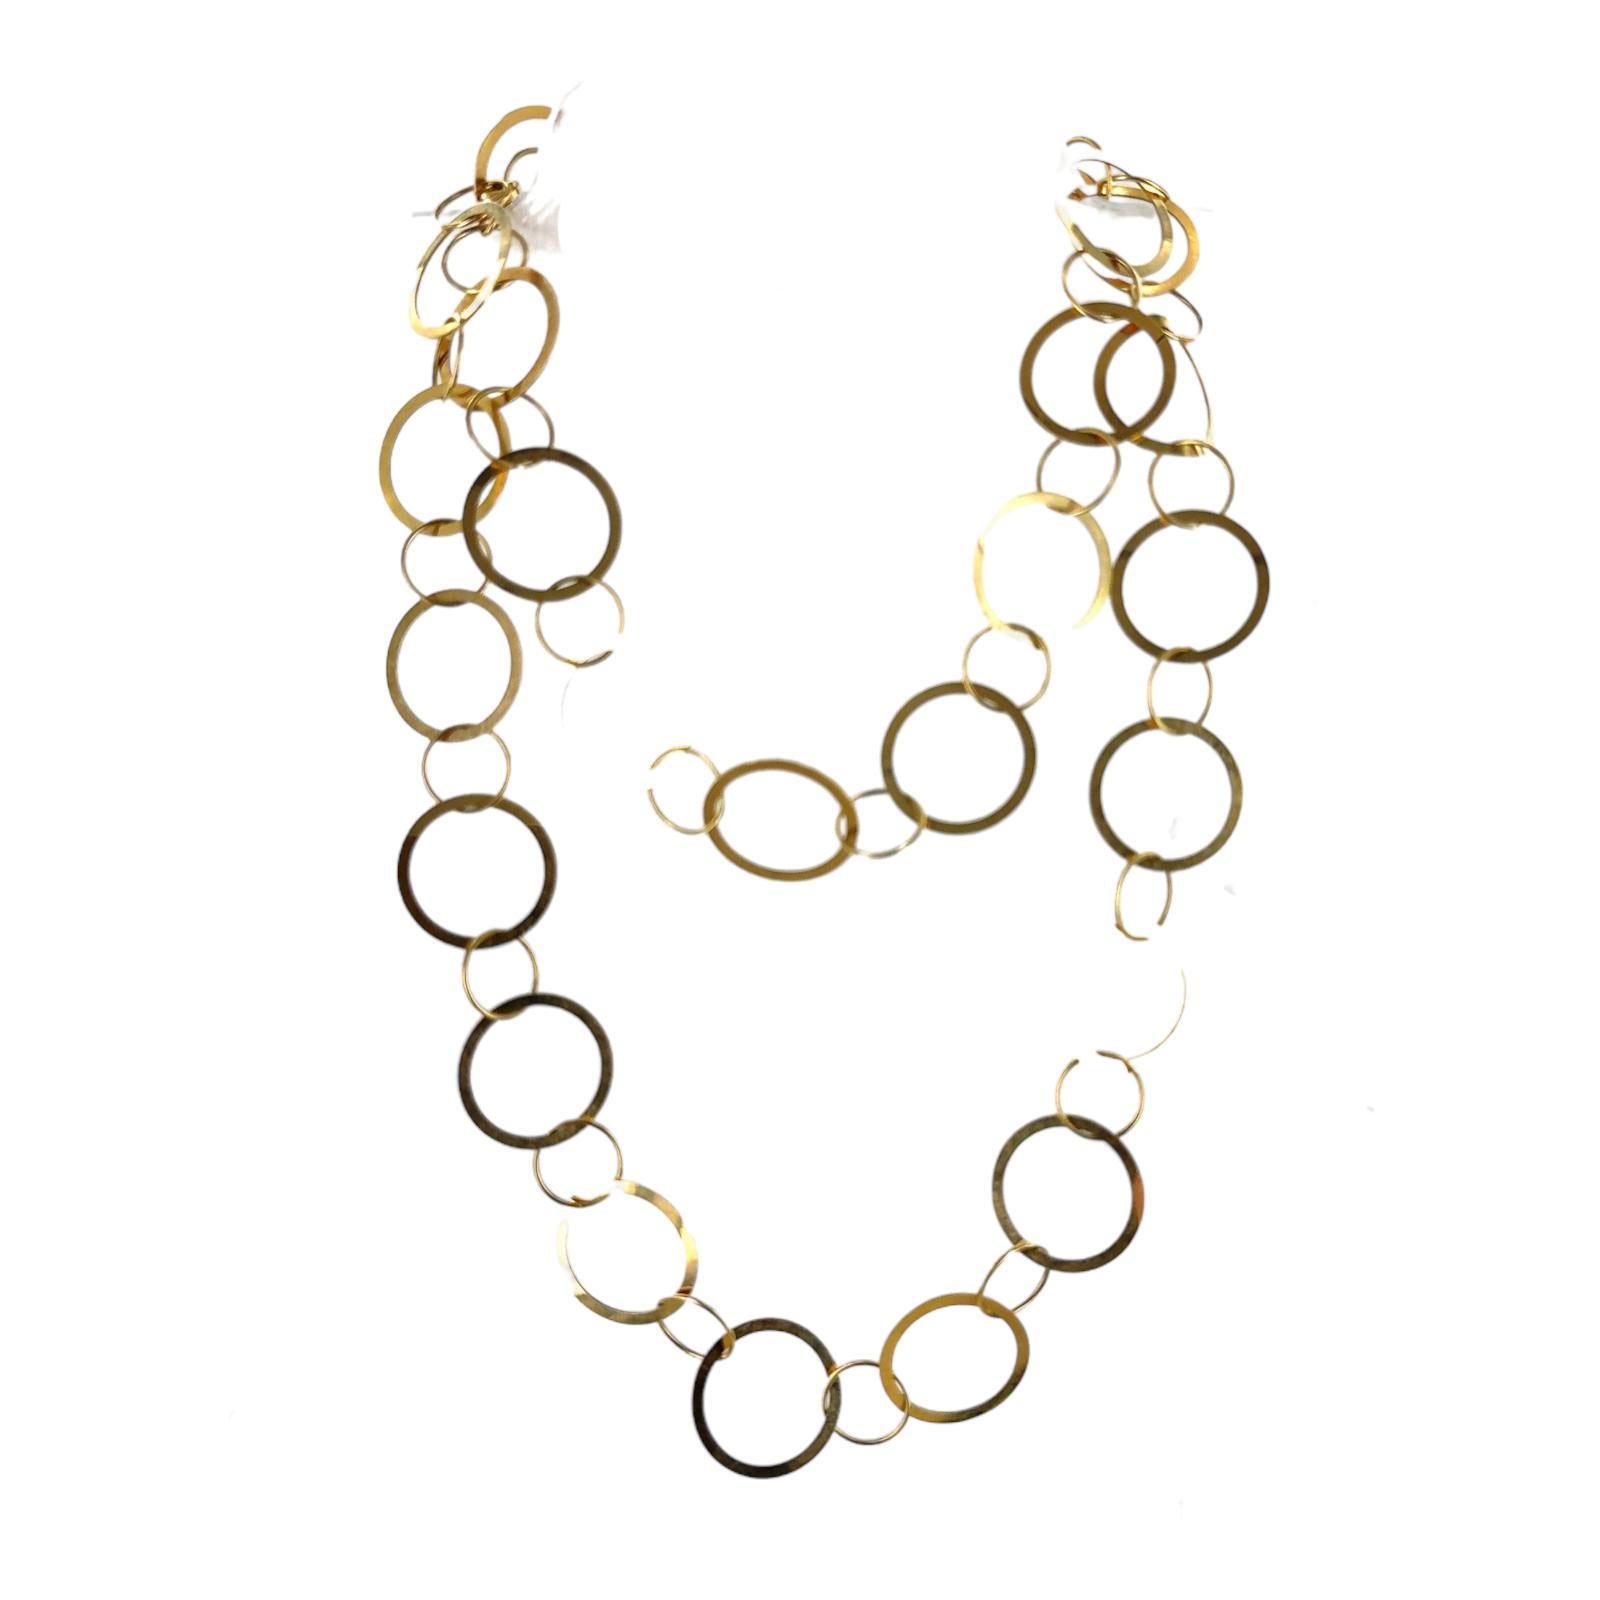 18 Karat Yellow Gold Round Open Link Modern Necklace 36 Inches In Excellent Condition For Sale In Boca Raton, FL